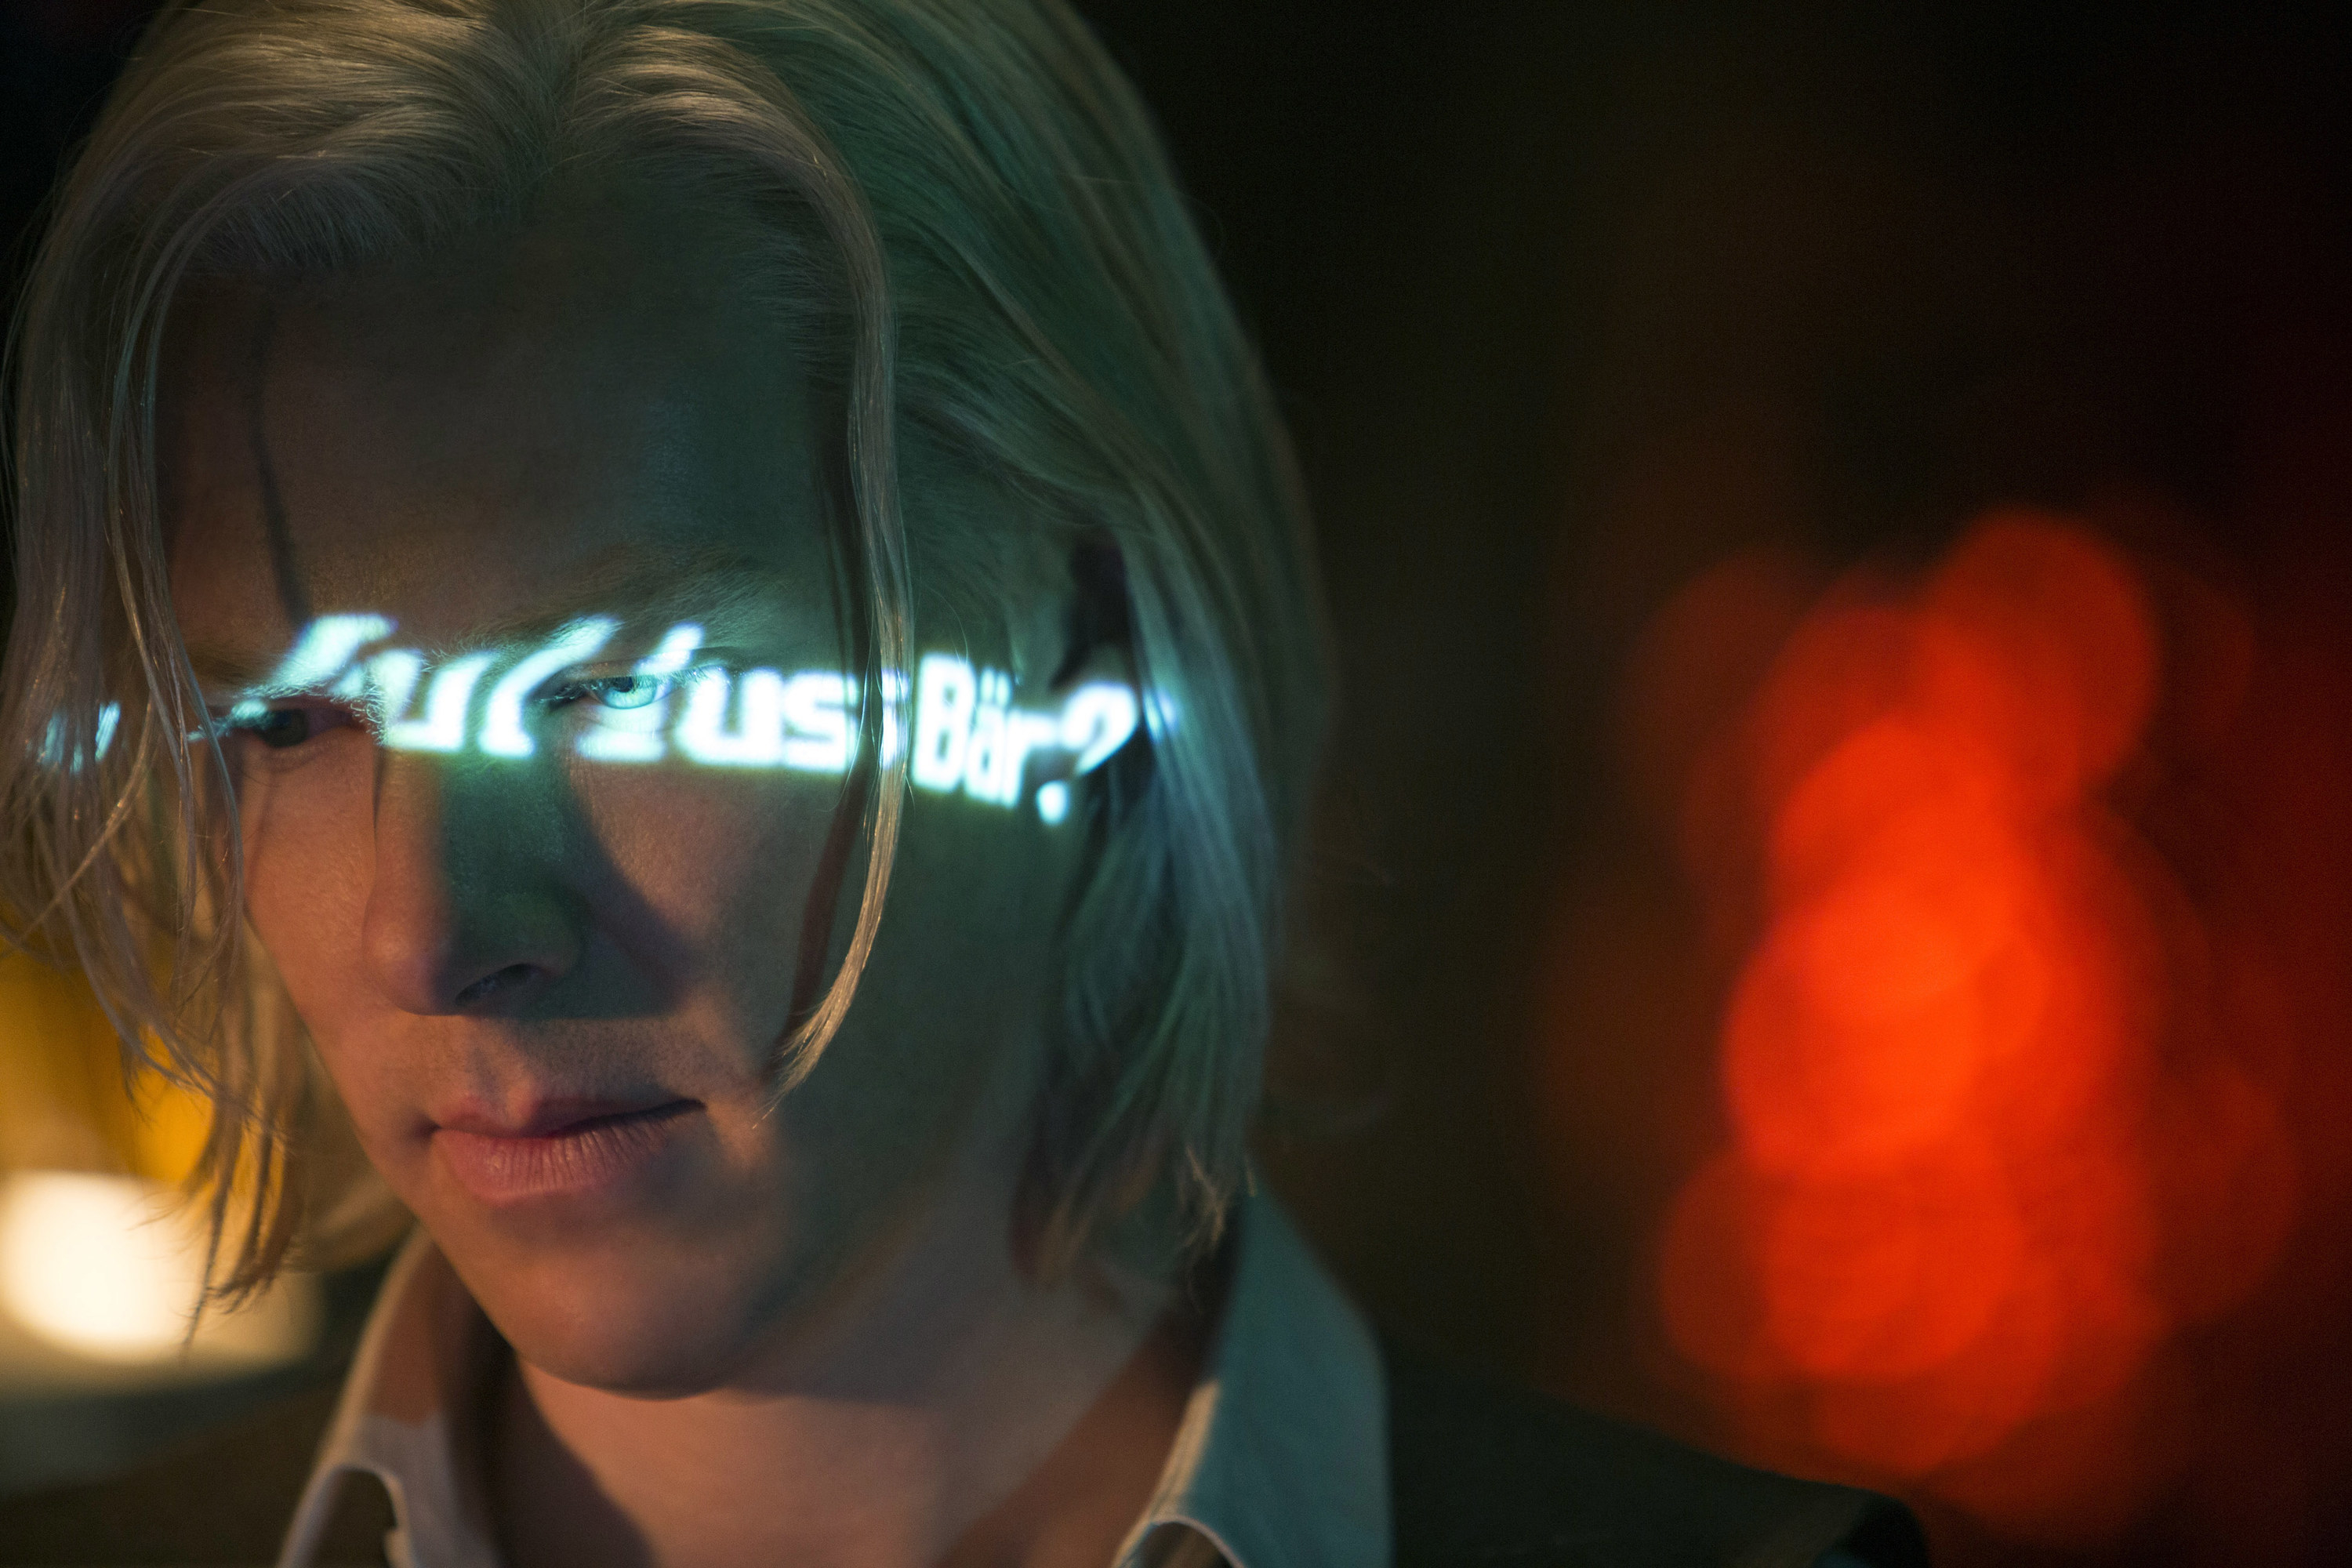 Assange hacking with text glowing on his face